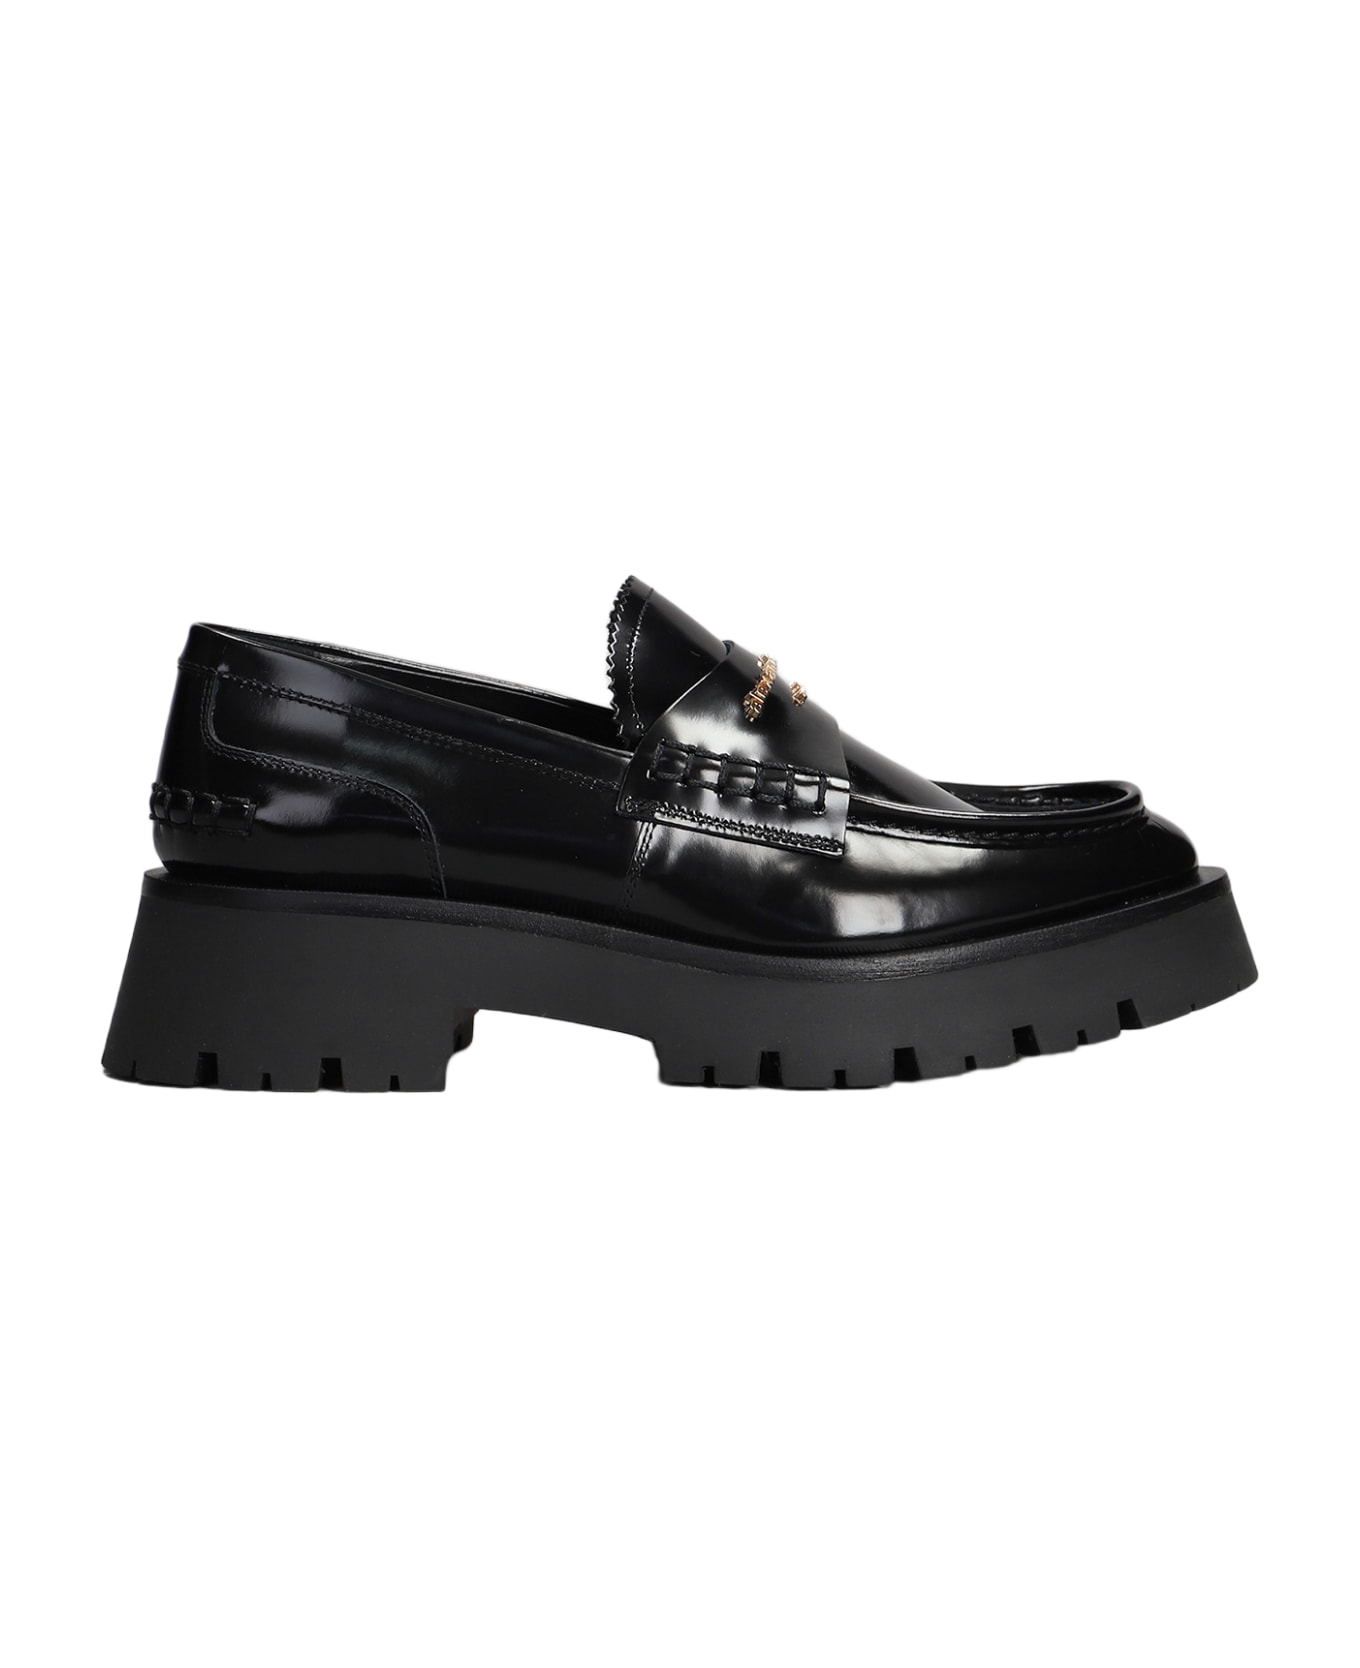 Alexander Wang Loafers In Black Leather - black